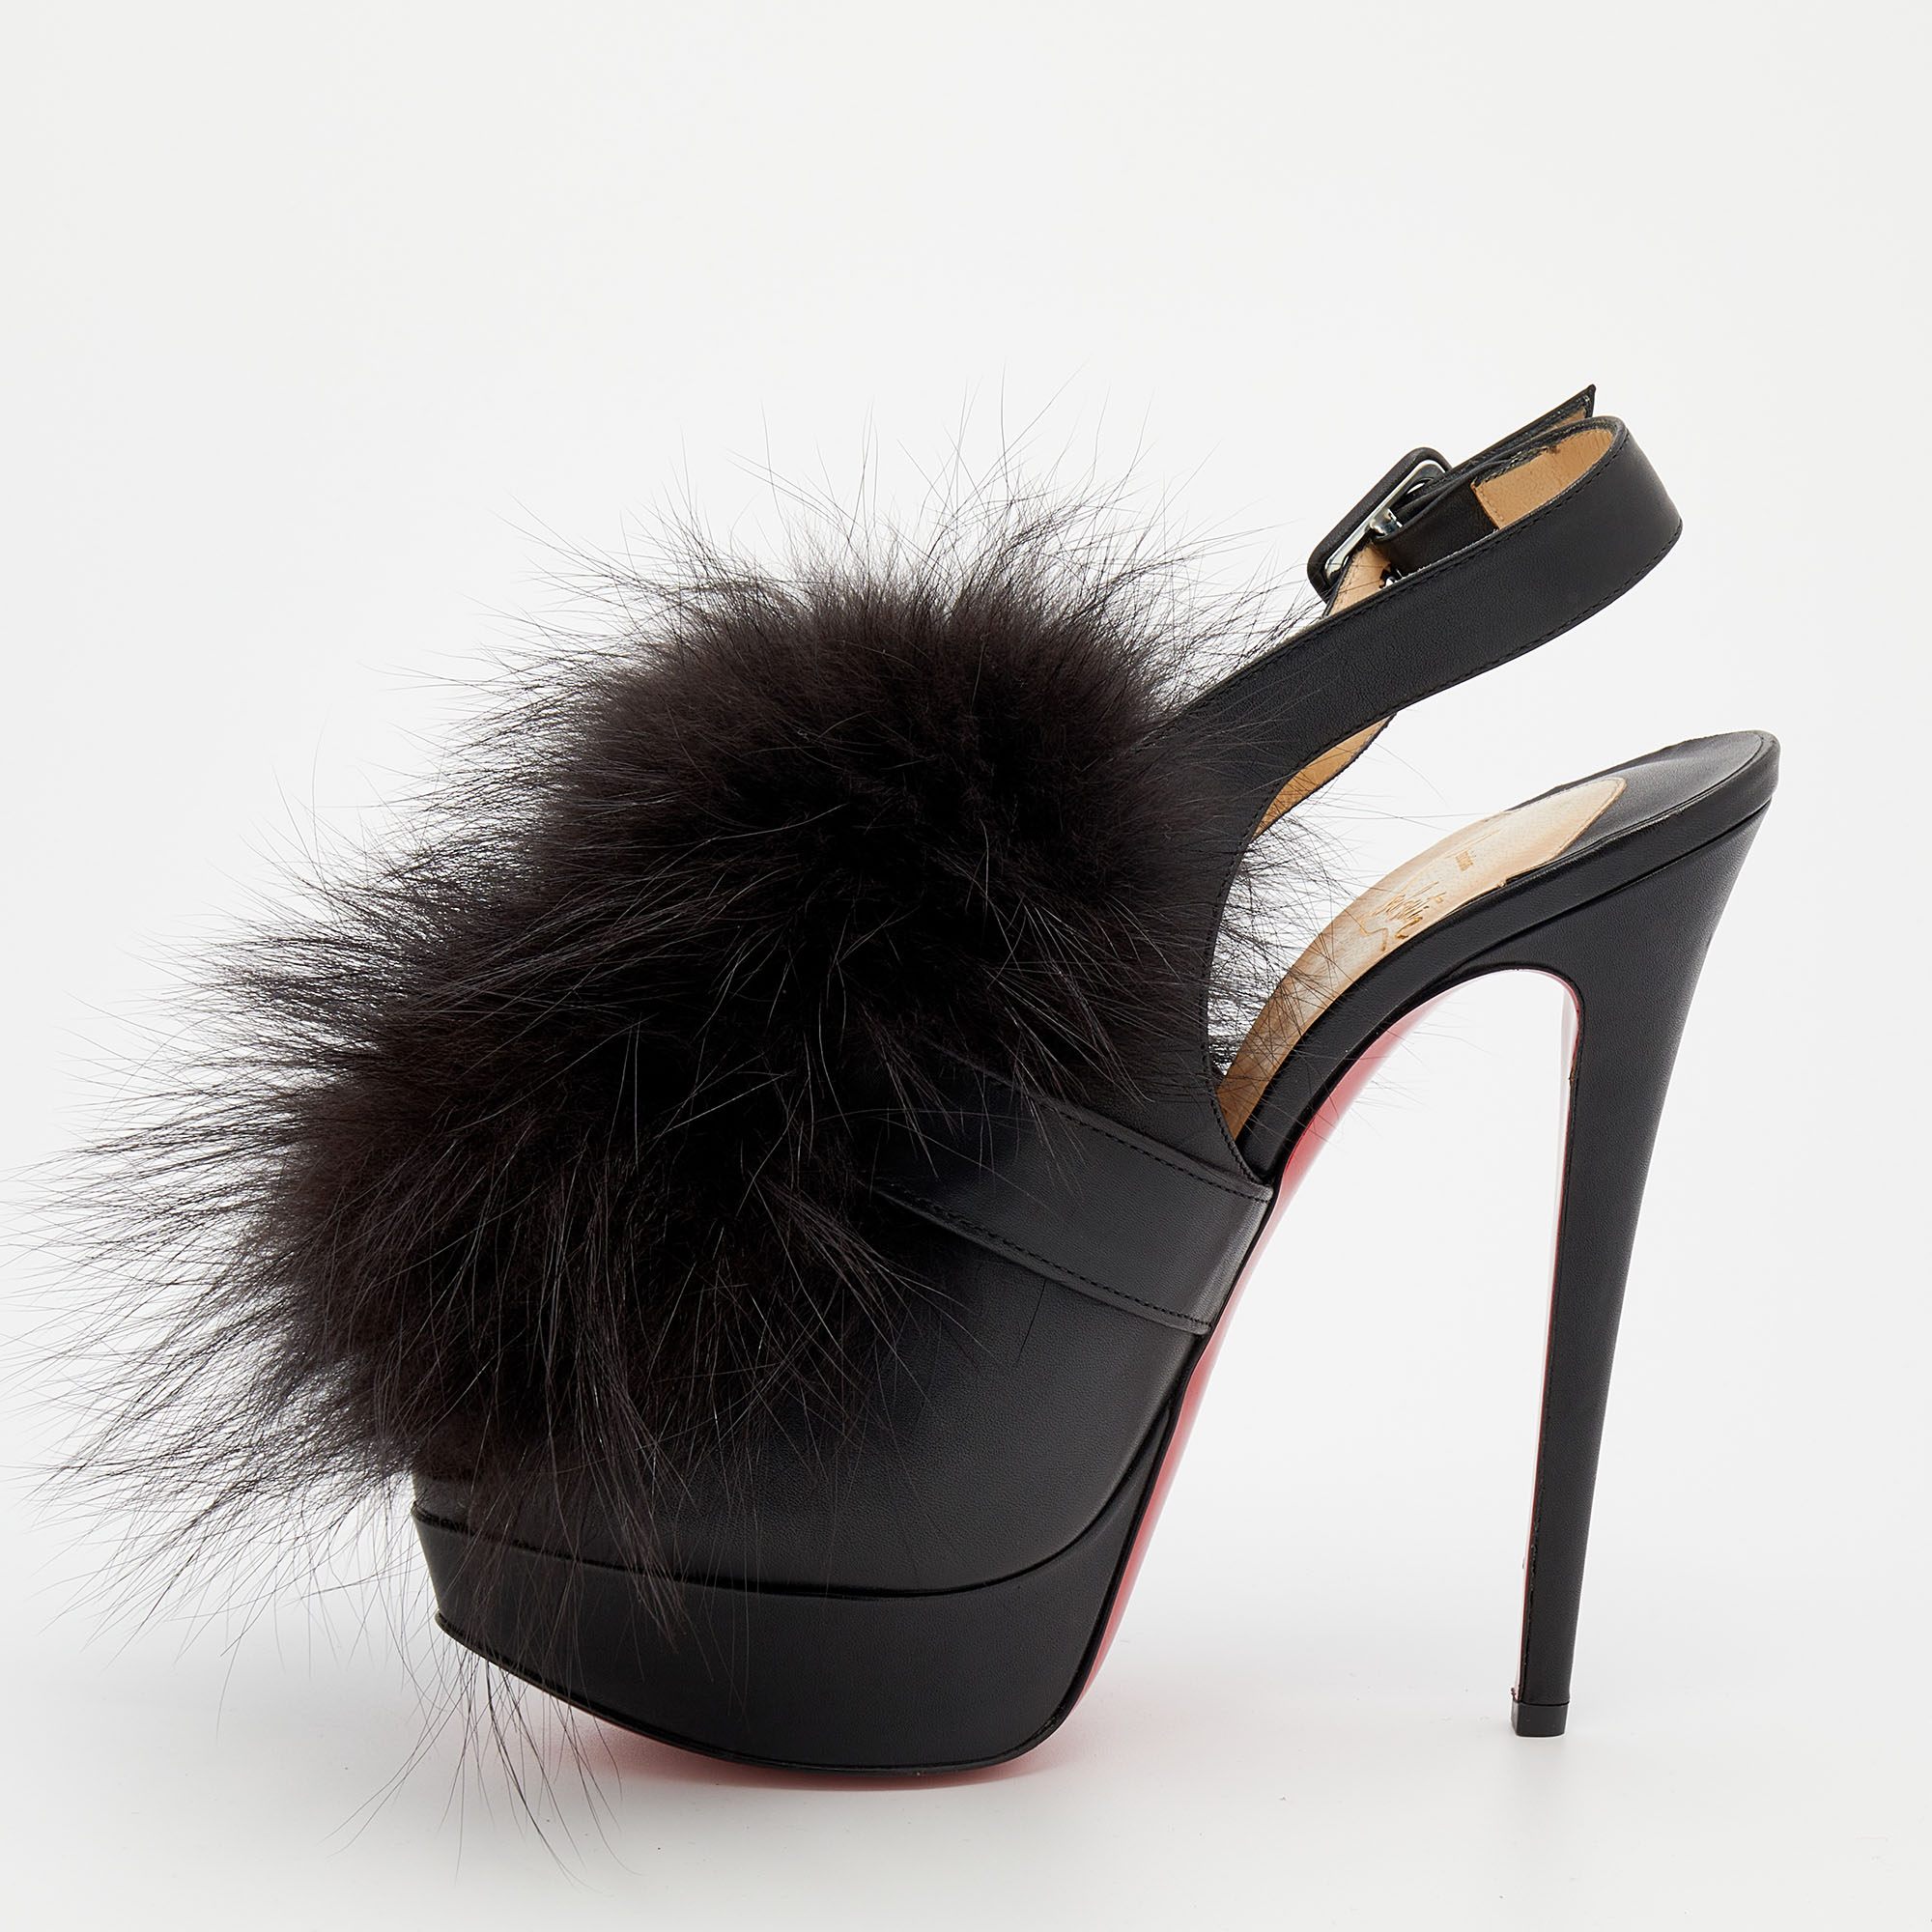 These splendid sandals from Christian Louboutin have an ultra modern feel with an artistic edge. The leather exterior adorned with extravagant fur trims on the front is visually appealing and the towering 15 cm heels offer loads of glamour. Buckles secure these black shoes safely. Bold and feminine they will be incredible with skinny pants or short dresses.